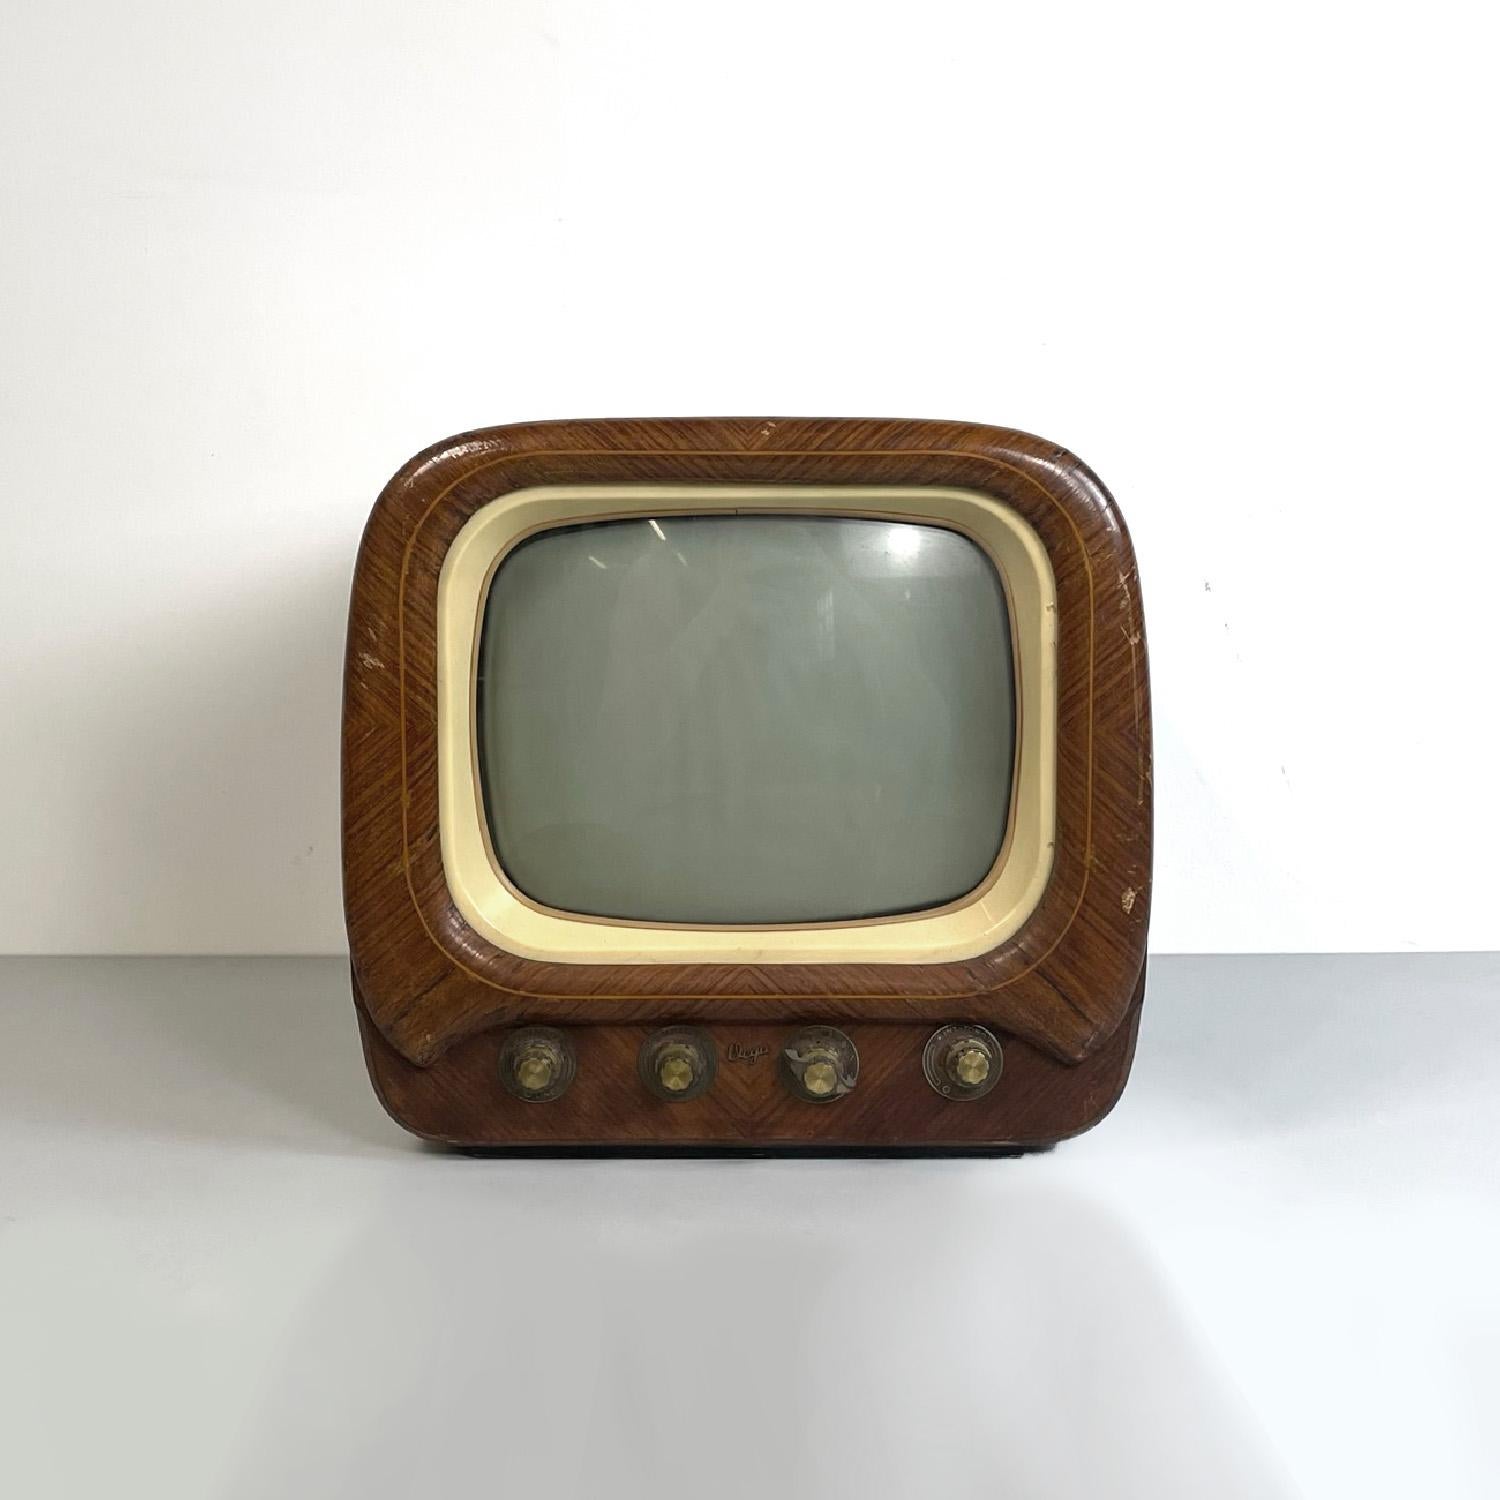 Italian mid-century modern brown wooden white plastic television by Vega, 1950s
Rectangular wooden television. The screen has rounded corners and a cream colored plastic frame, underneath are four knobs in plastic and brass. The wooden structure has